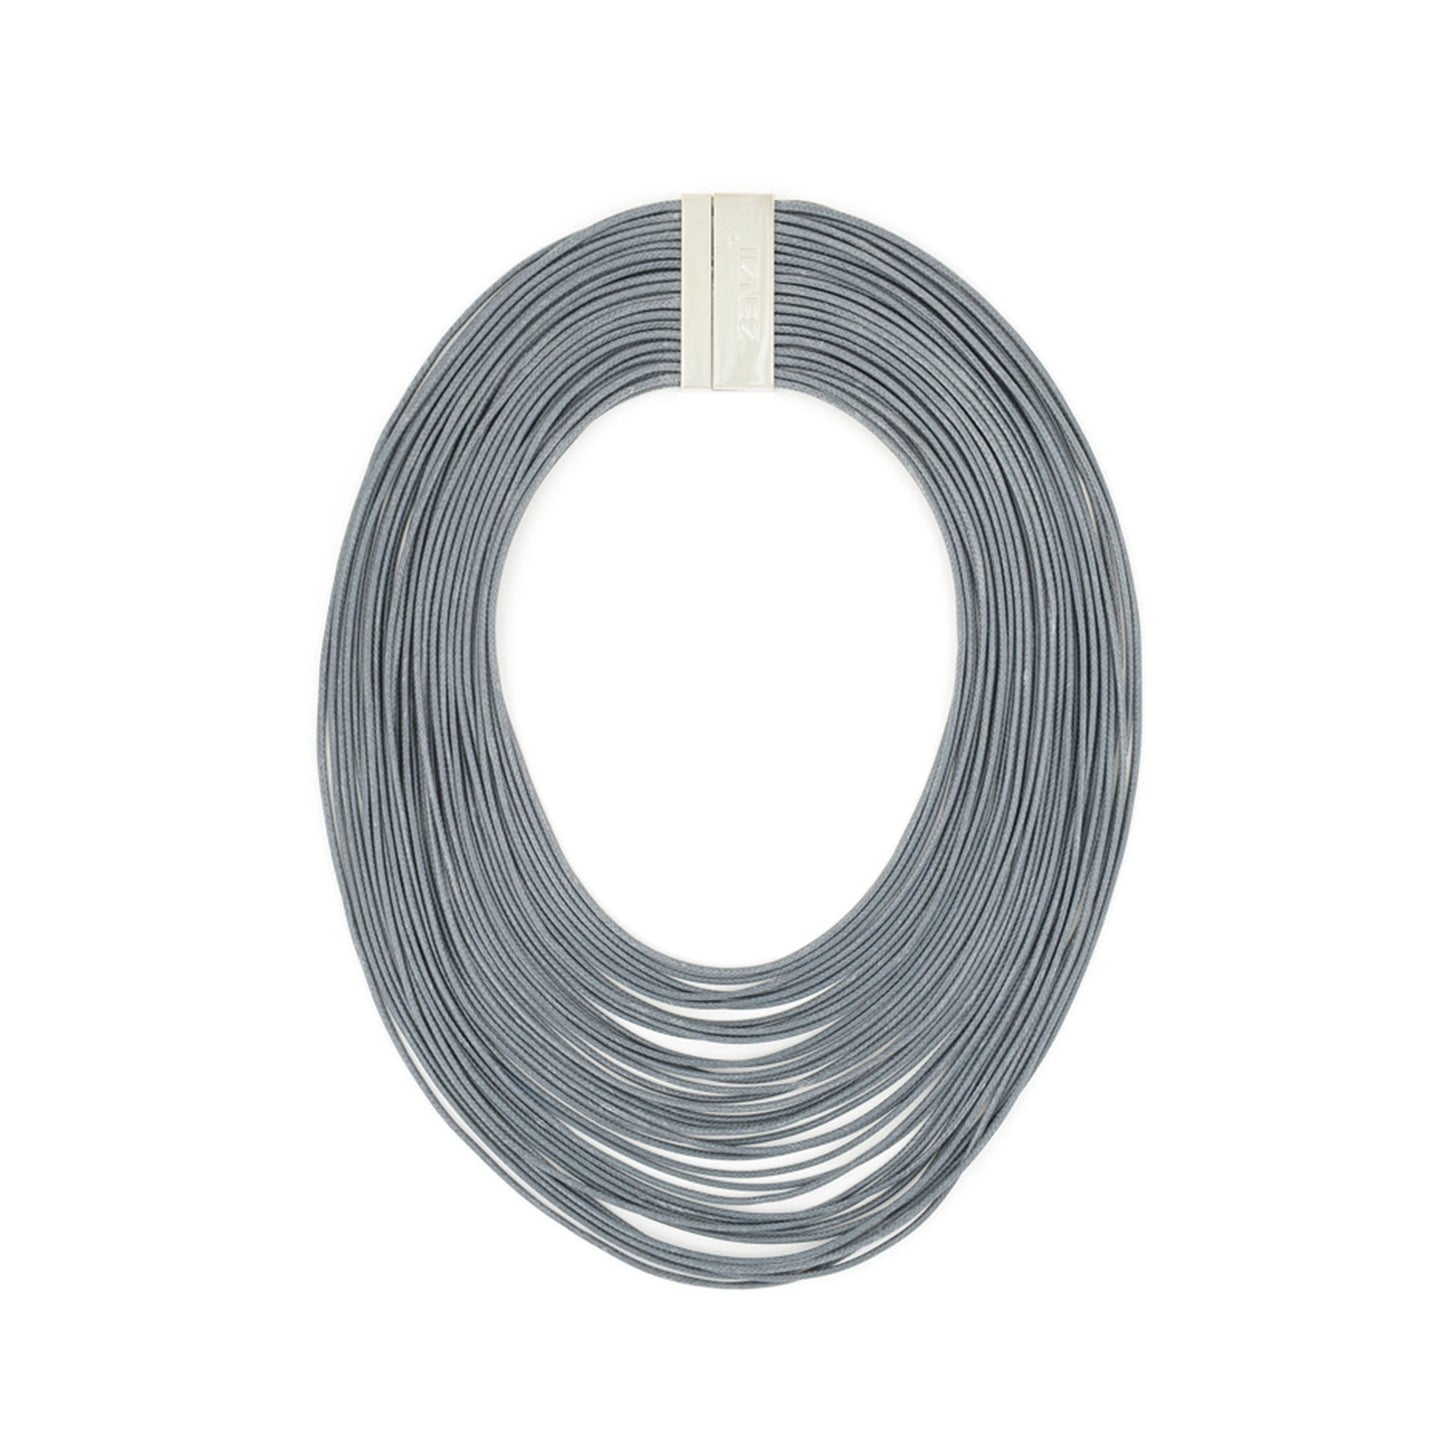 Zenzii Multi Layer Rope Necklace